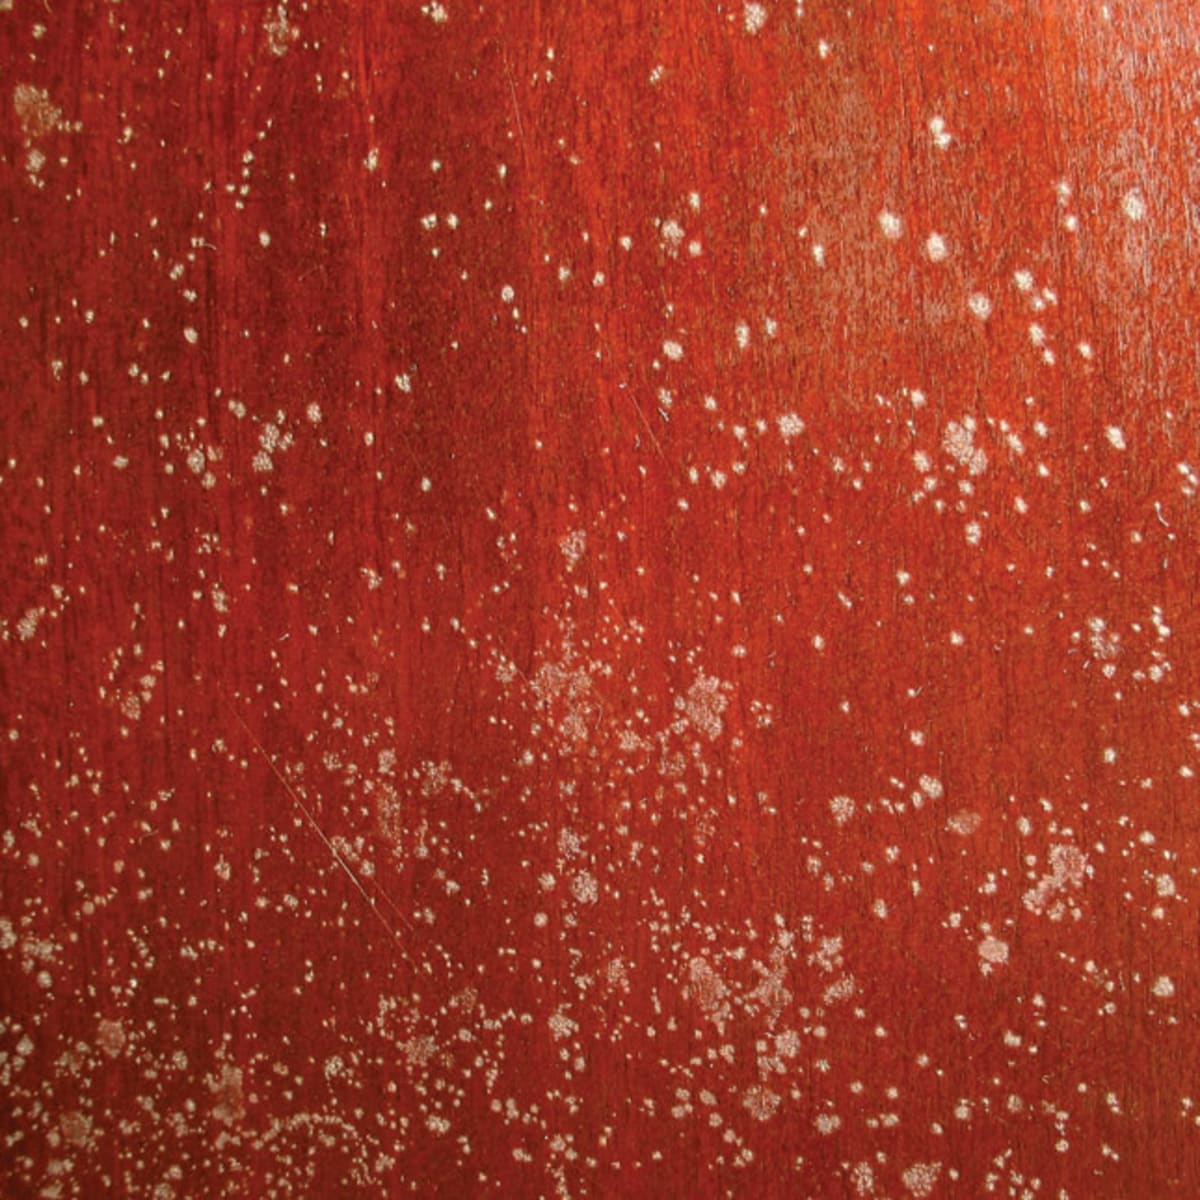 Treating mold and mildew - Woodshop News